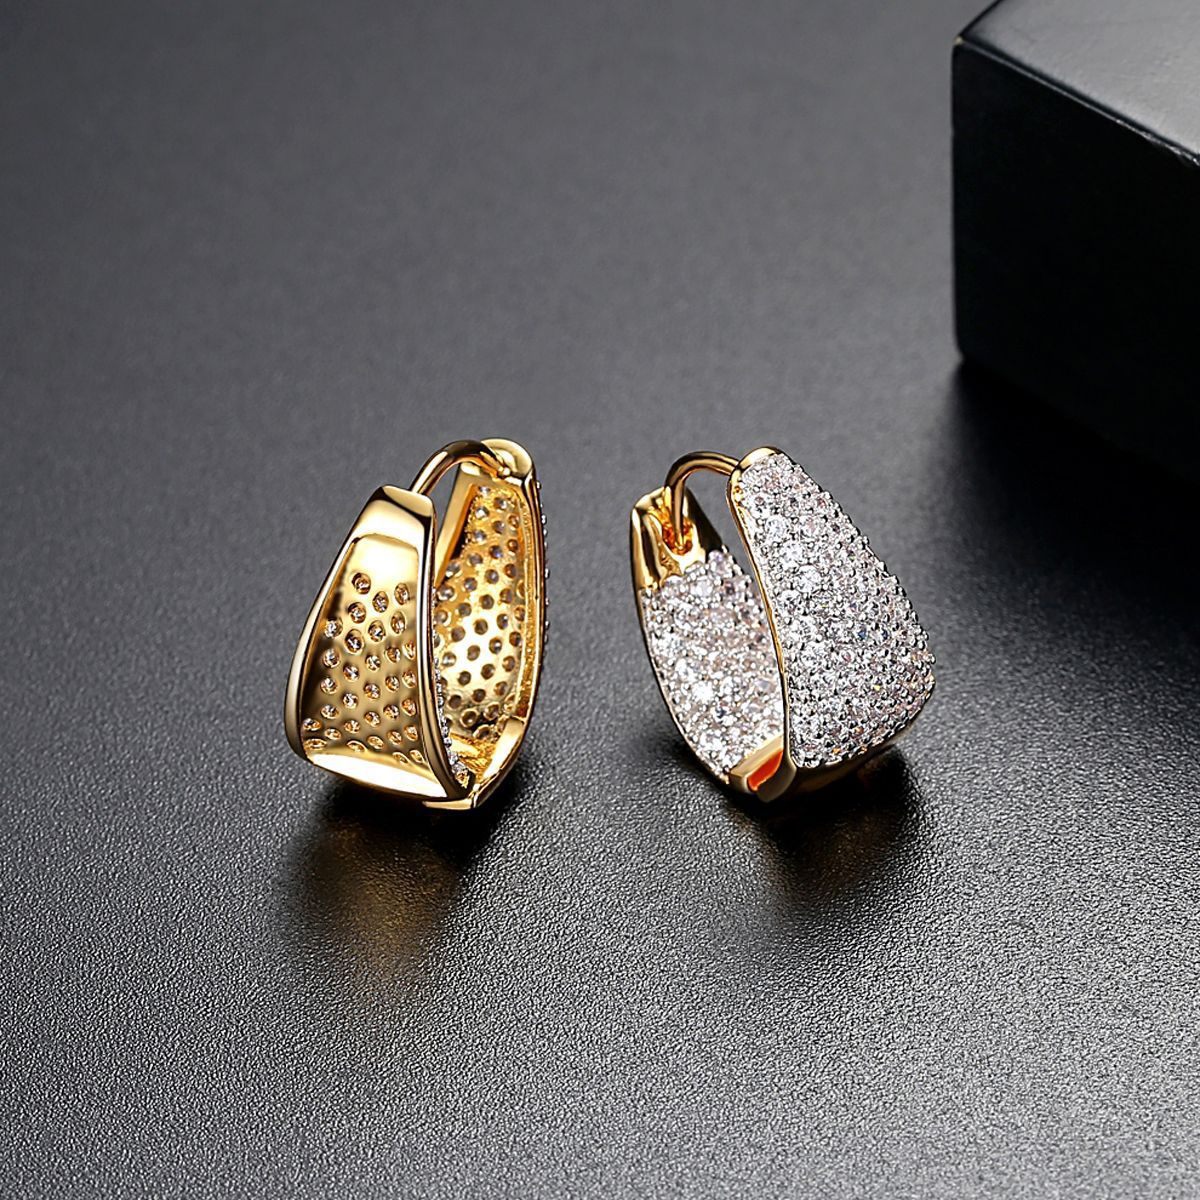 Elevate your style with our 18k gold-plated pave zircon earrings. The perfect combination of elegance and glamour, these stunning earrings add a dazzling touch of sparkle to any outfit.